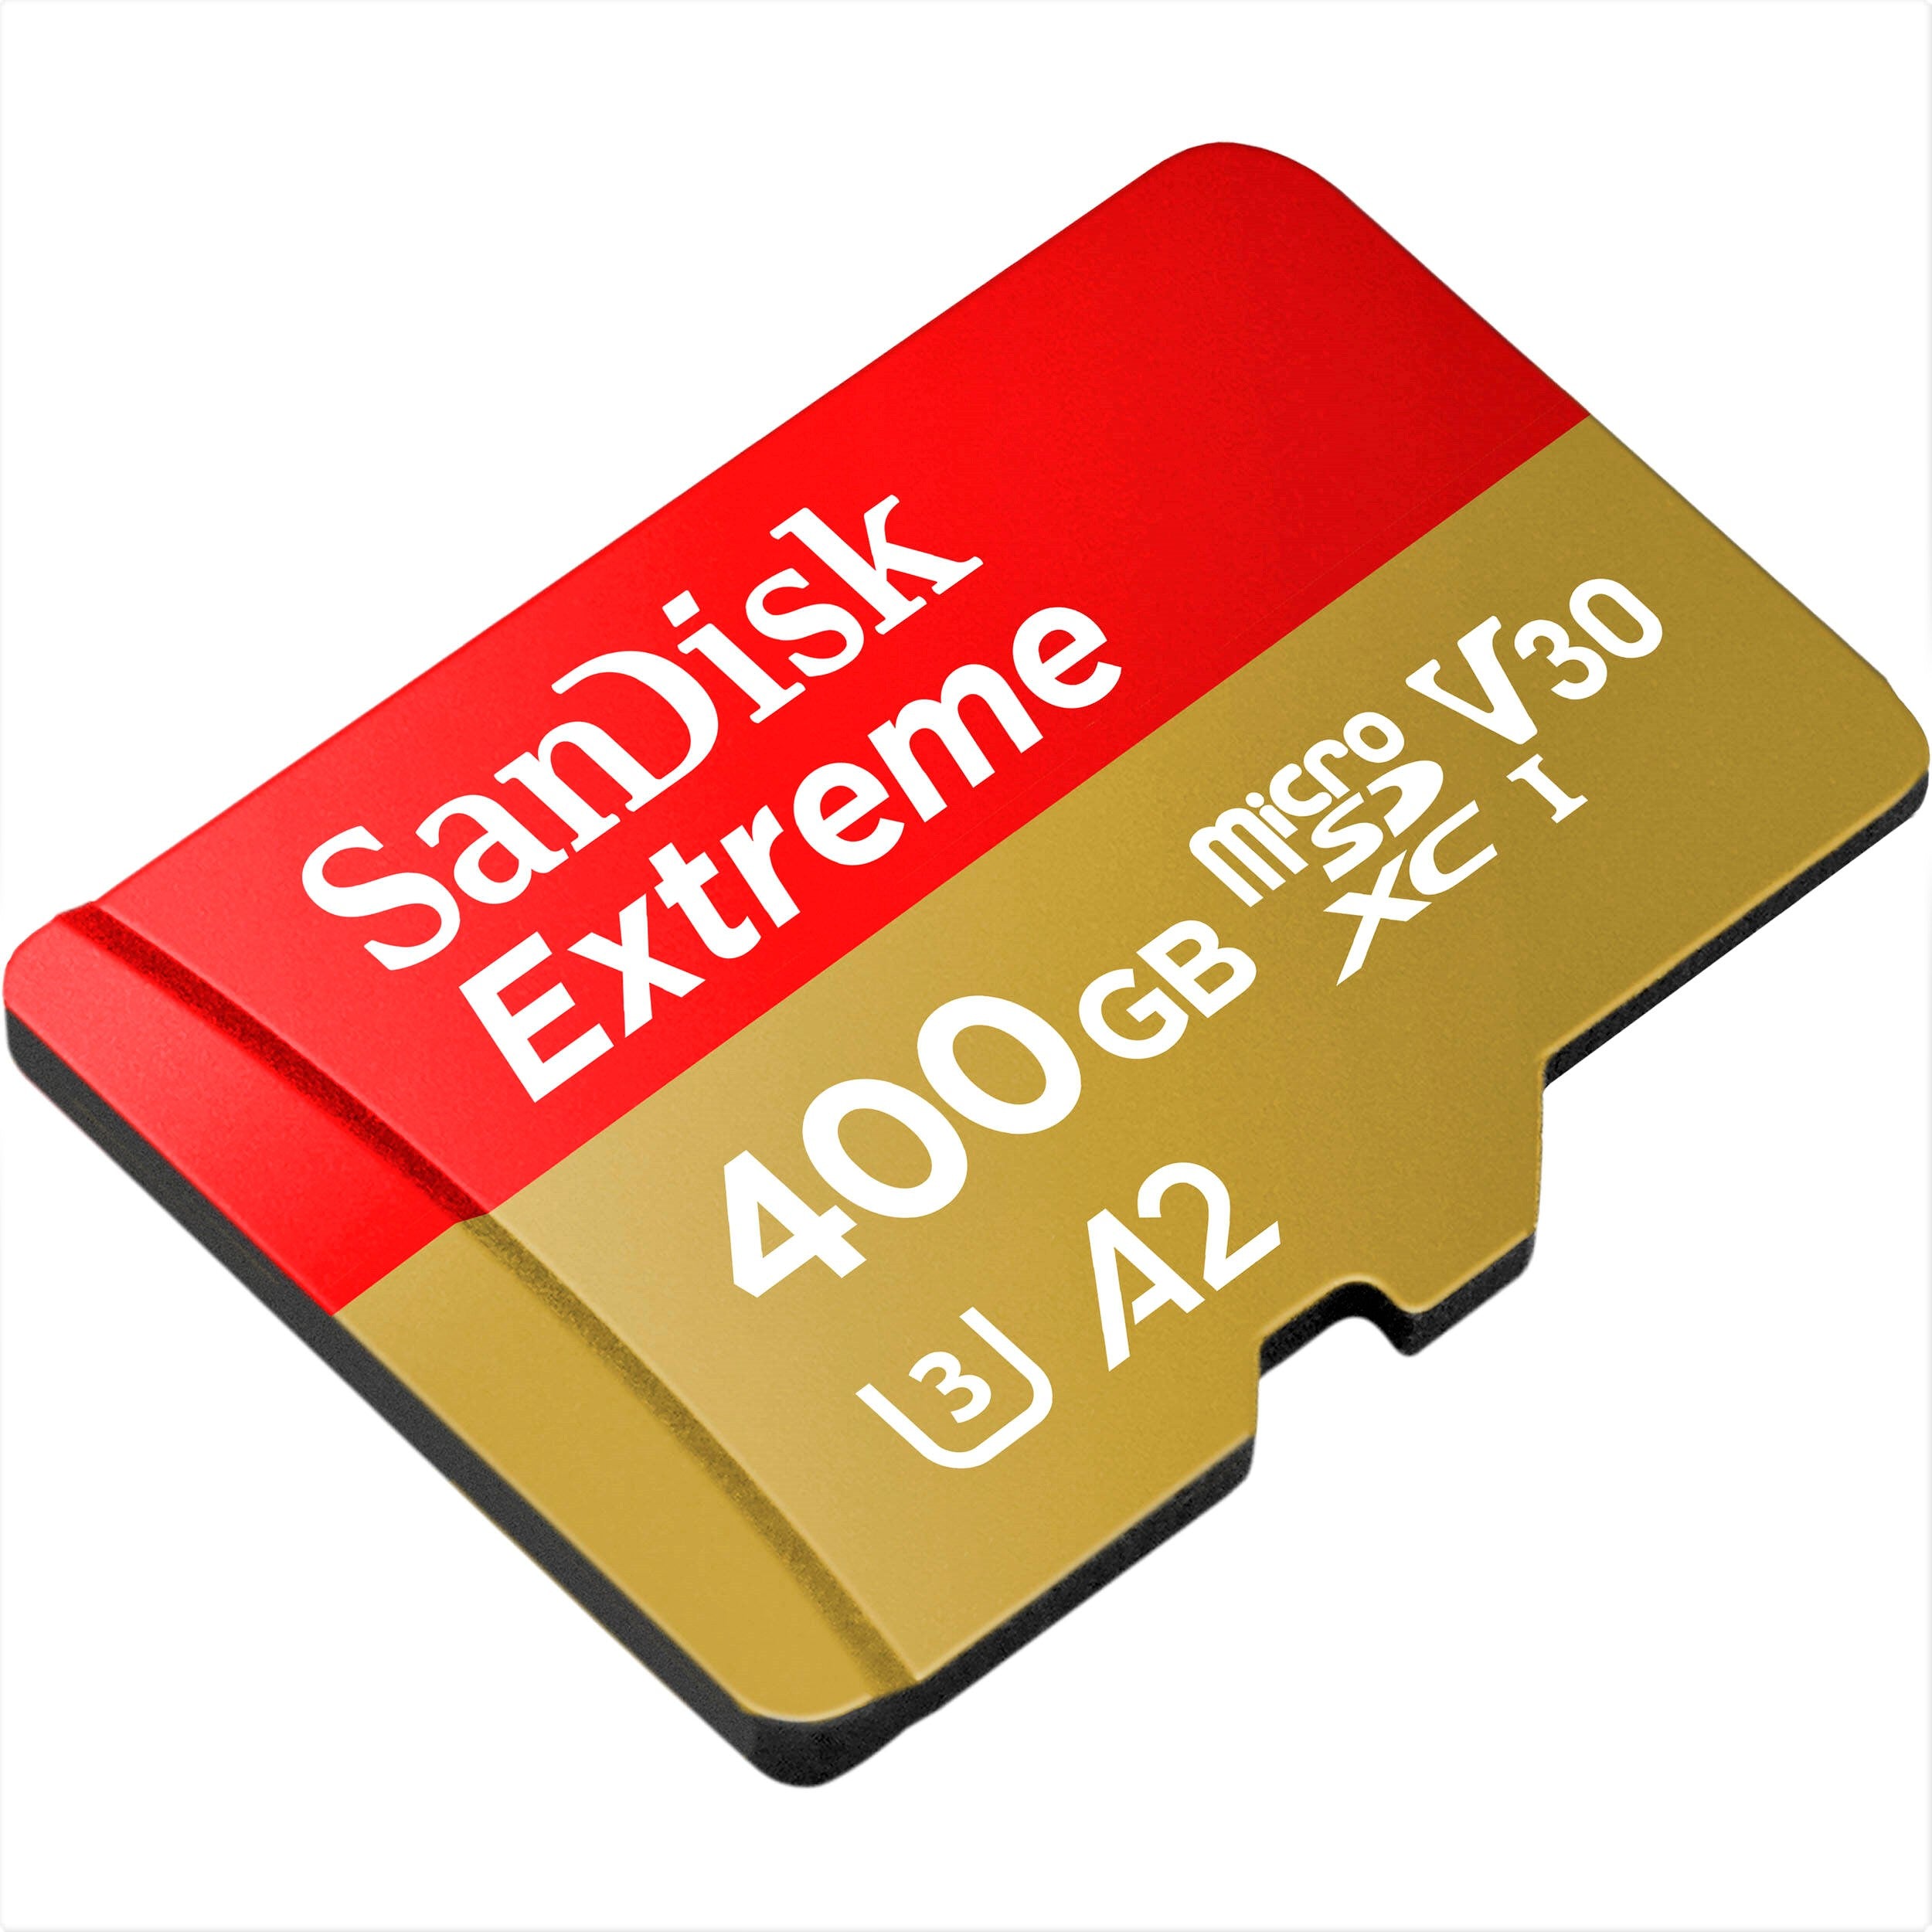 SanDisk Extreme 400 GB microSDXC Memory Card + SD Adapter with A2 App Performance + Rescue Pro Deluxe, Up to 160 MB/s, Class 10, UHS-I, U3, V30, Red/Gold